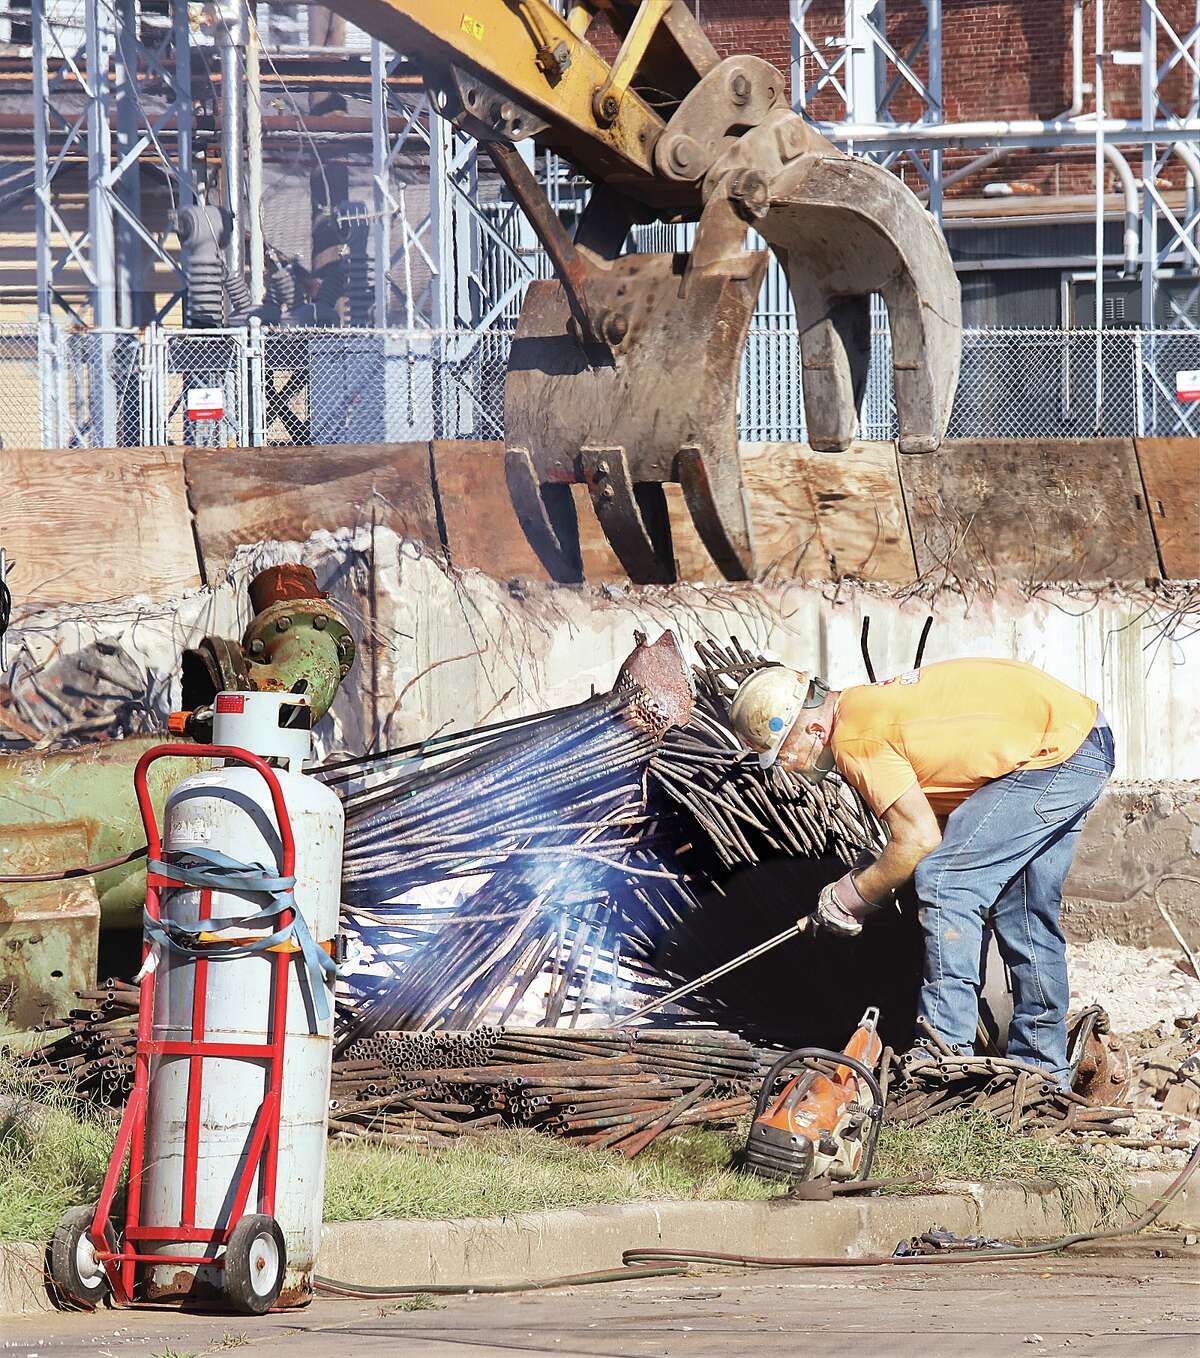 A worker cuts up reinforcing bar stock at the demolition site of the former Olin Headquarters Building on Shamrock Street in East Alton Thursday. Spirtas Wrecking Co. from St. Louis has been working for over a month to tear down the office building which is owned by Wieland Co.